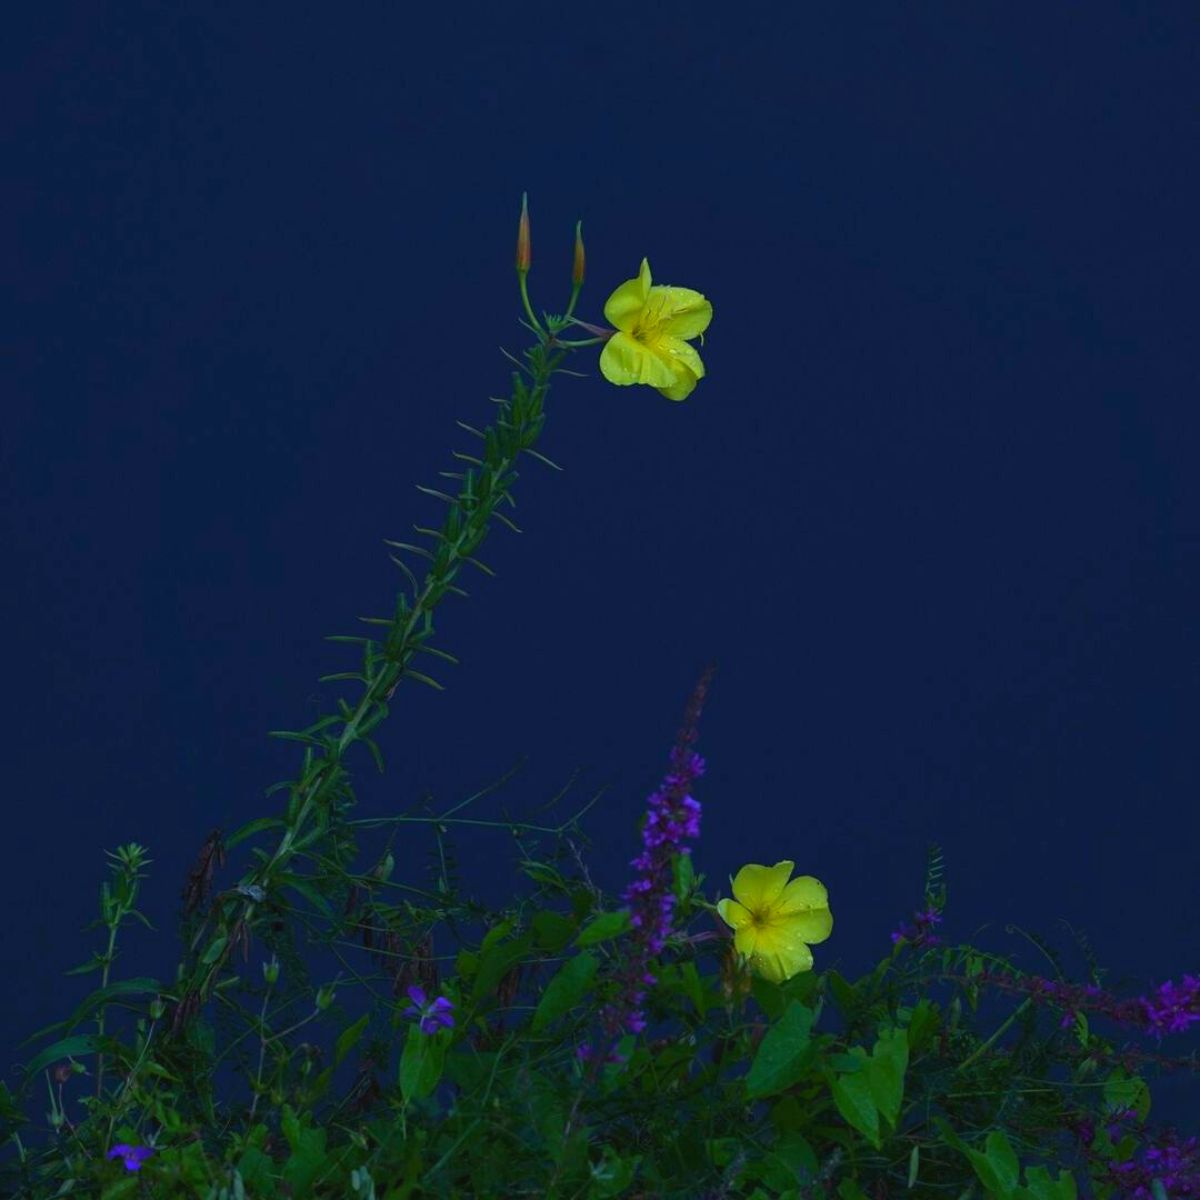 The evening primrose is one of the eight flowers that bloom at night